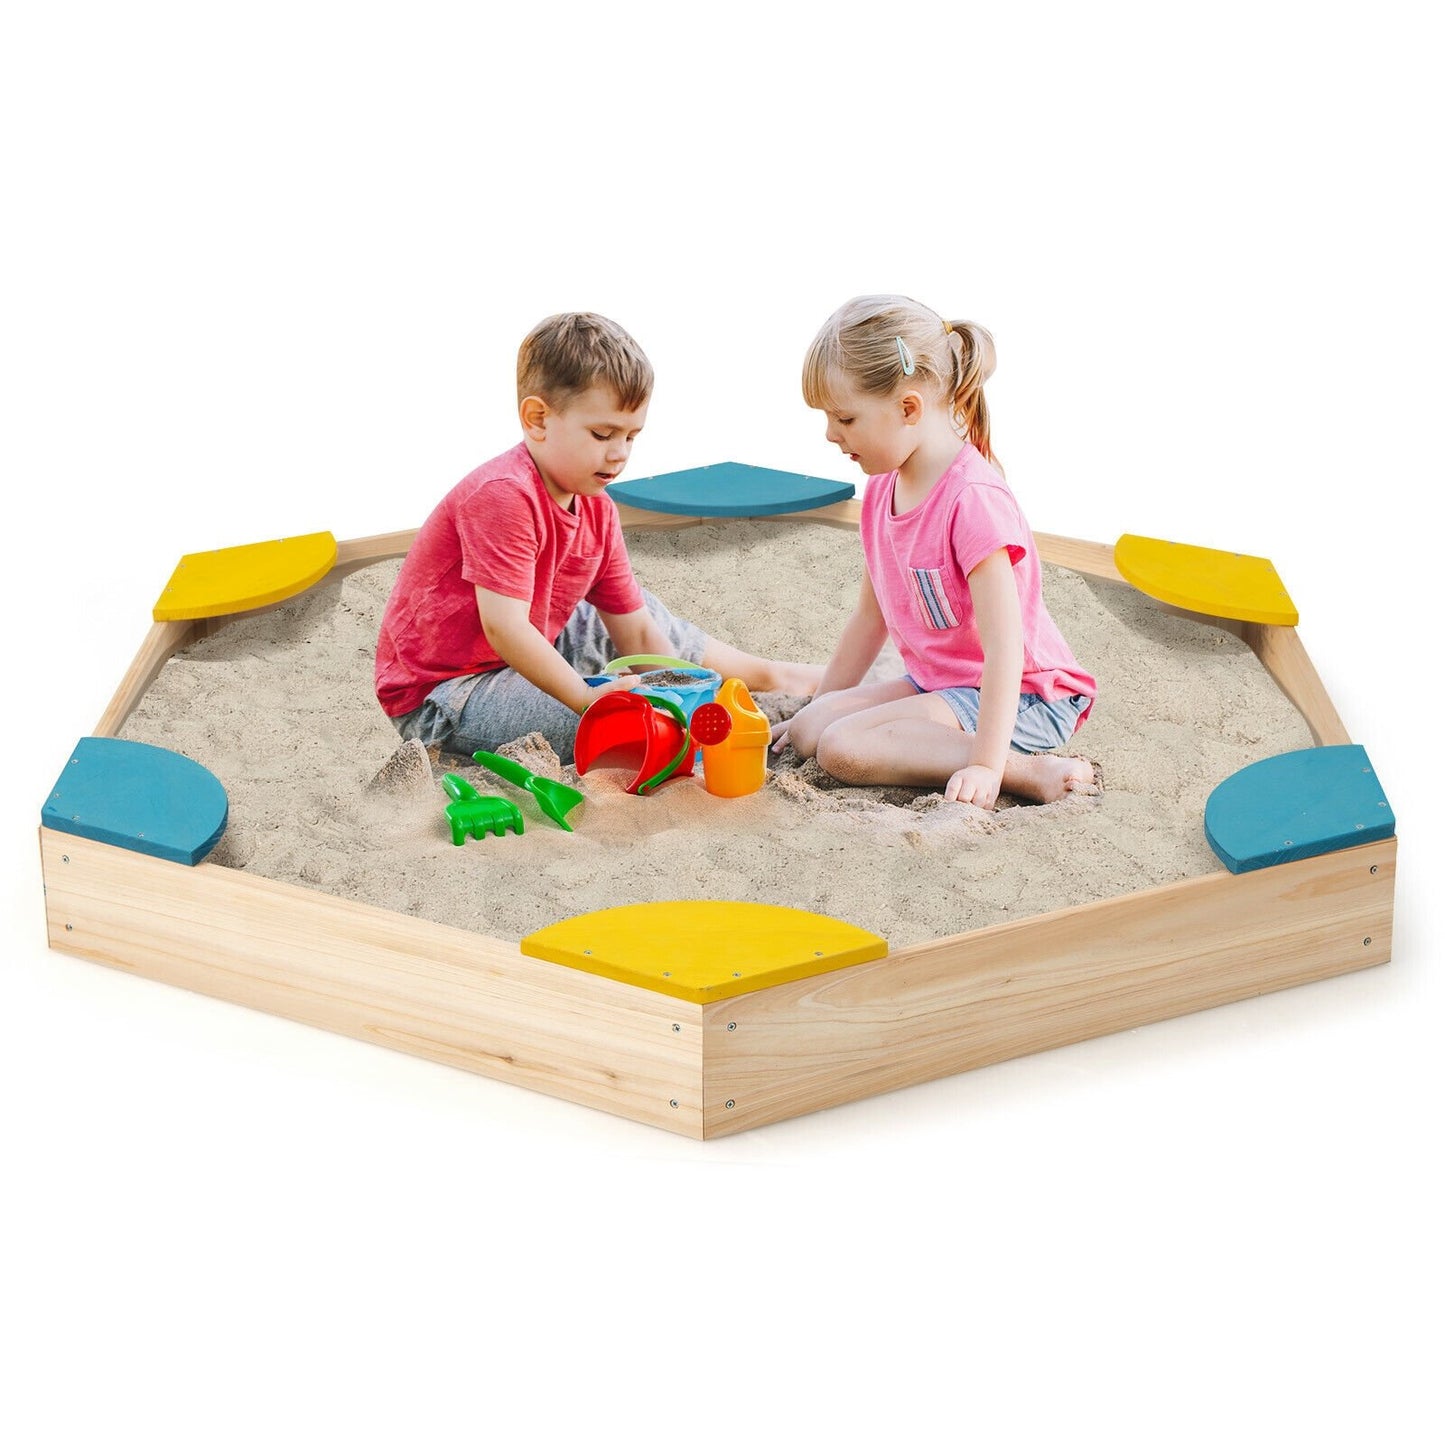 Outdoor Solid Wood Sandbox with 6 Built-in Fan-shaped Seats, Multicolor